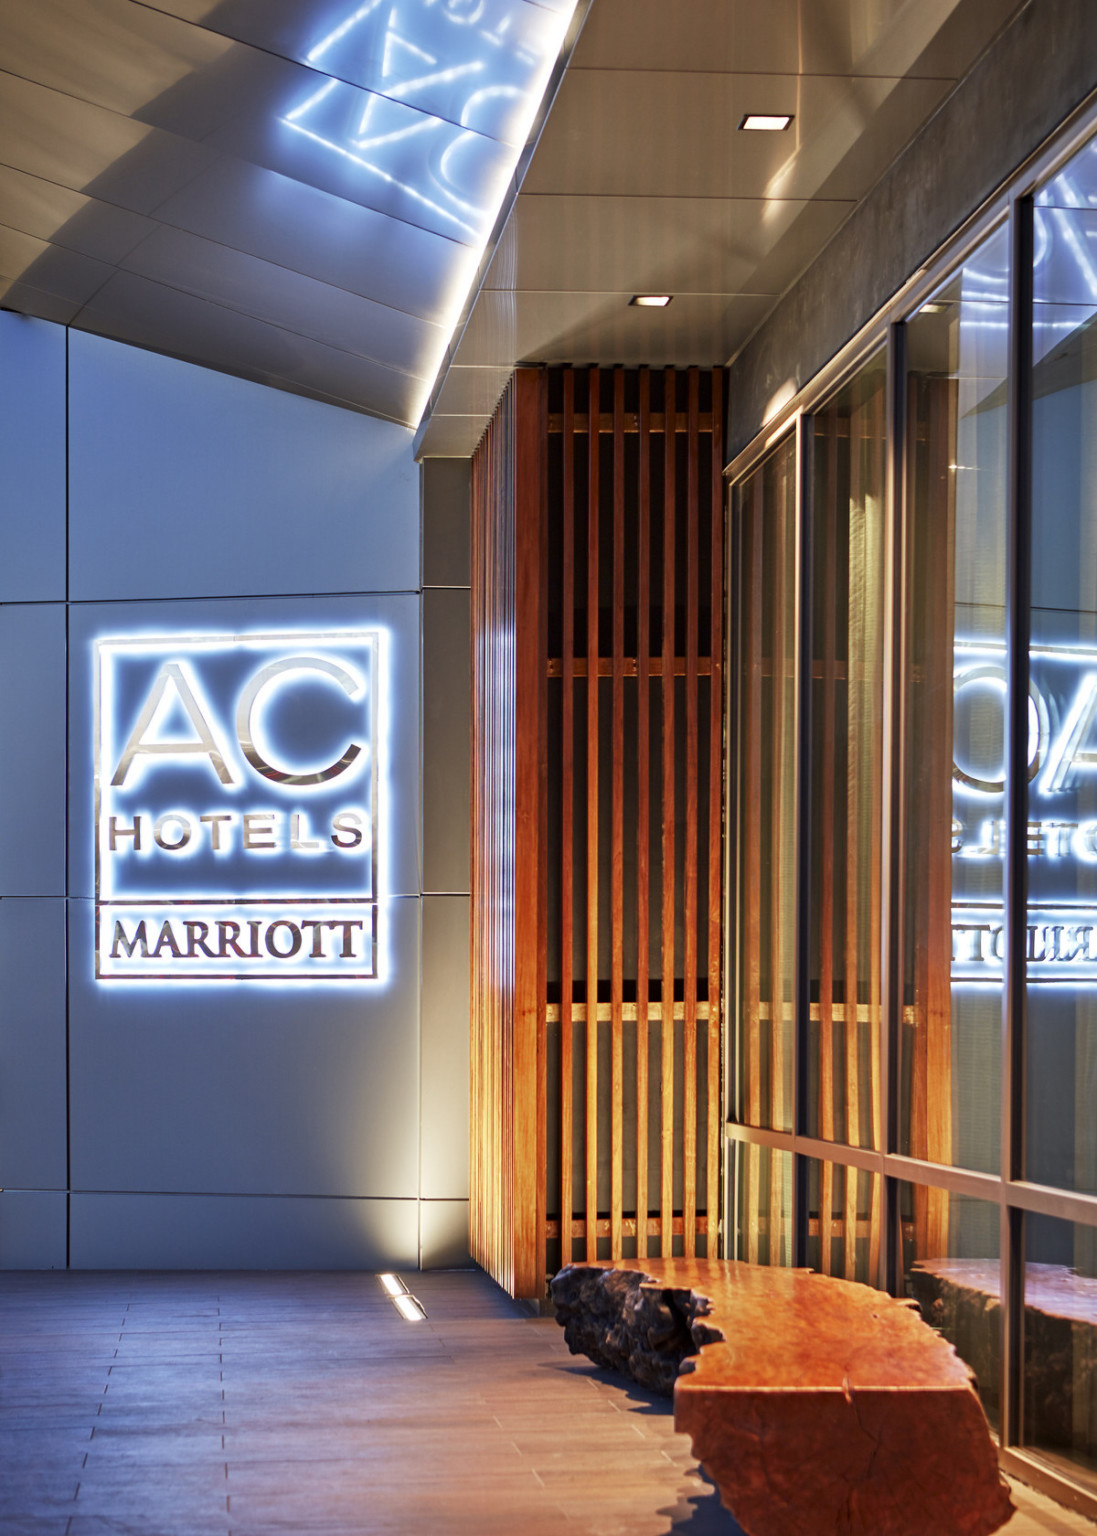 Illuminated signage on white exterior wall reads AC Hotels Marriott, beside wood panel corner detail